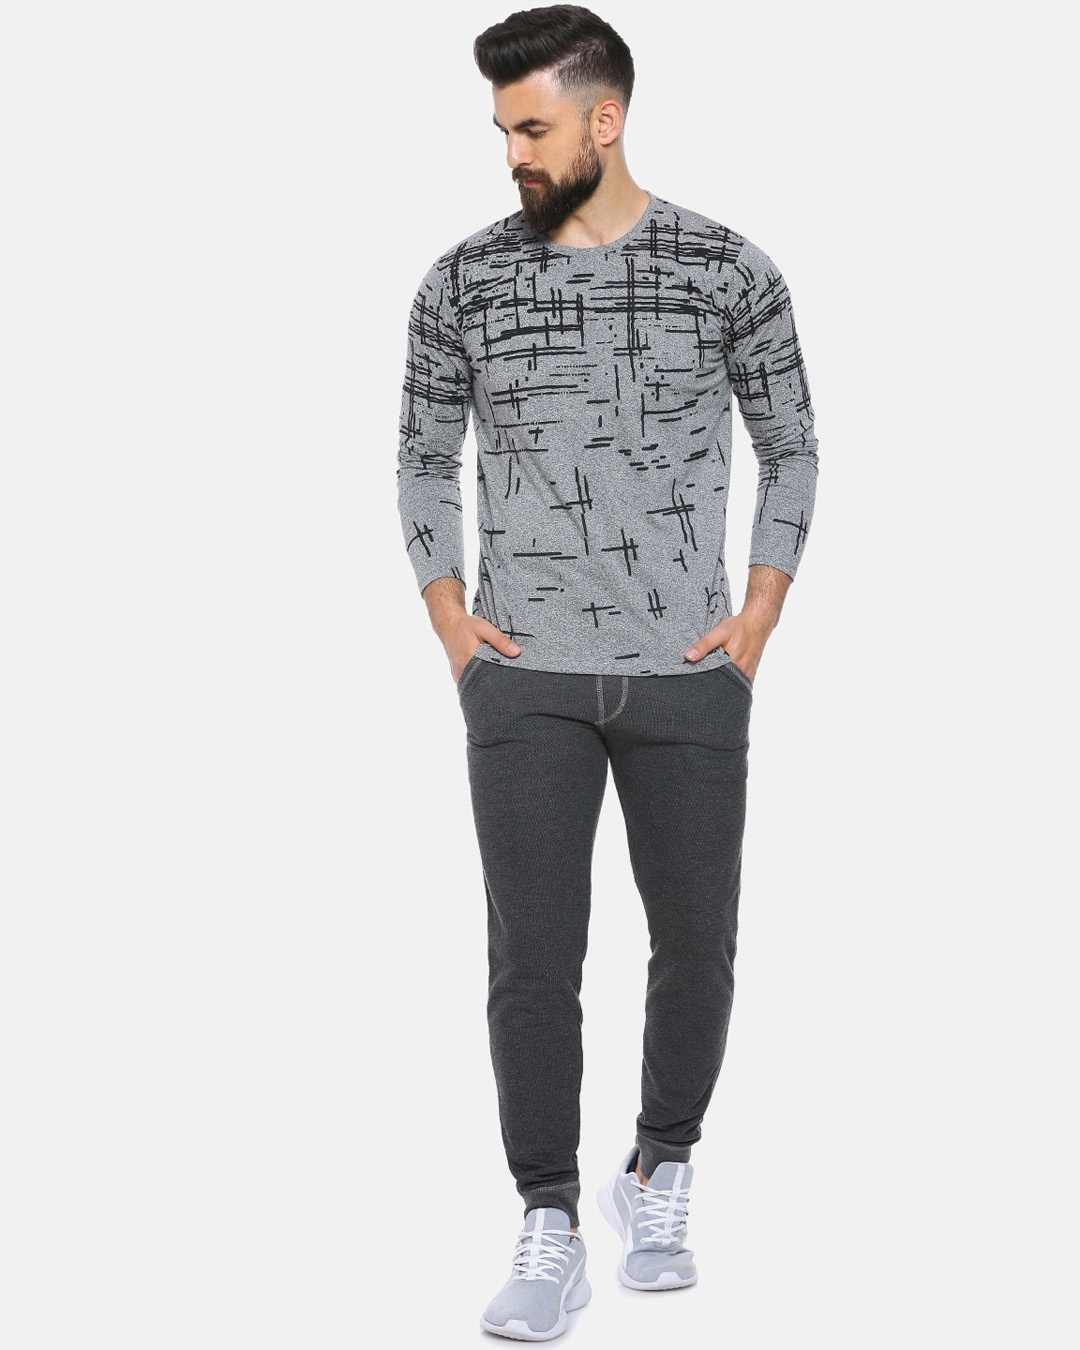 Shop Graphic Print Men's Round or Crew Stylish New Trends Grey Casual T-Shirt-Full